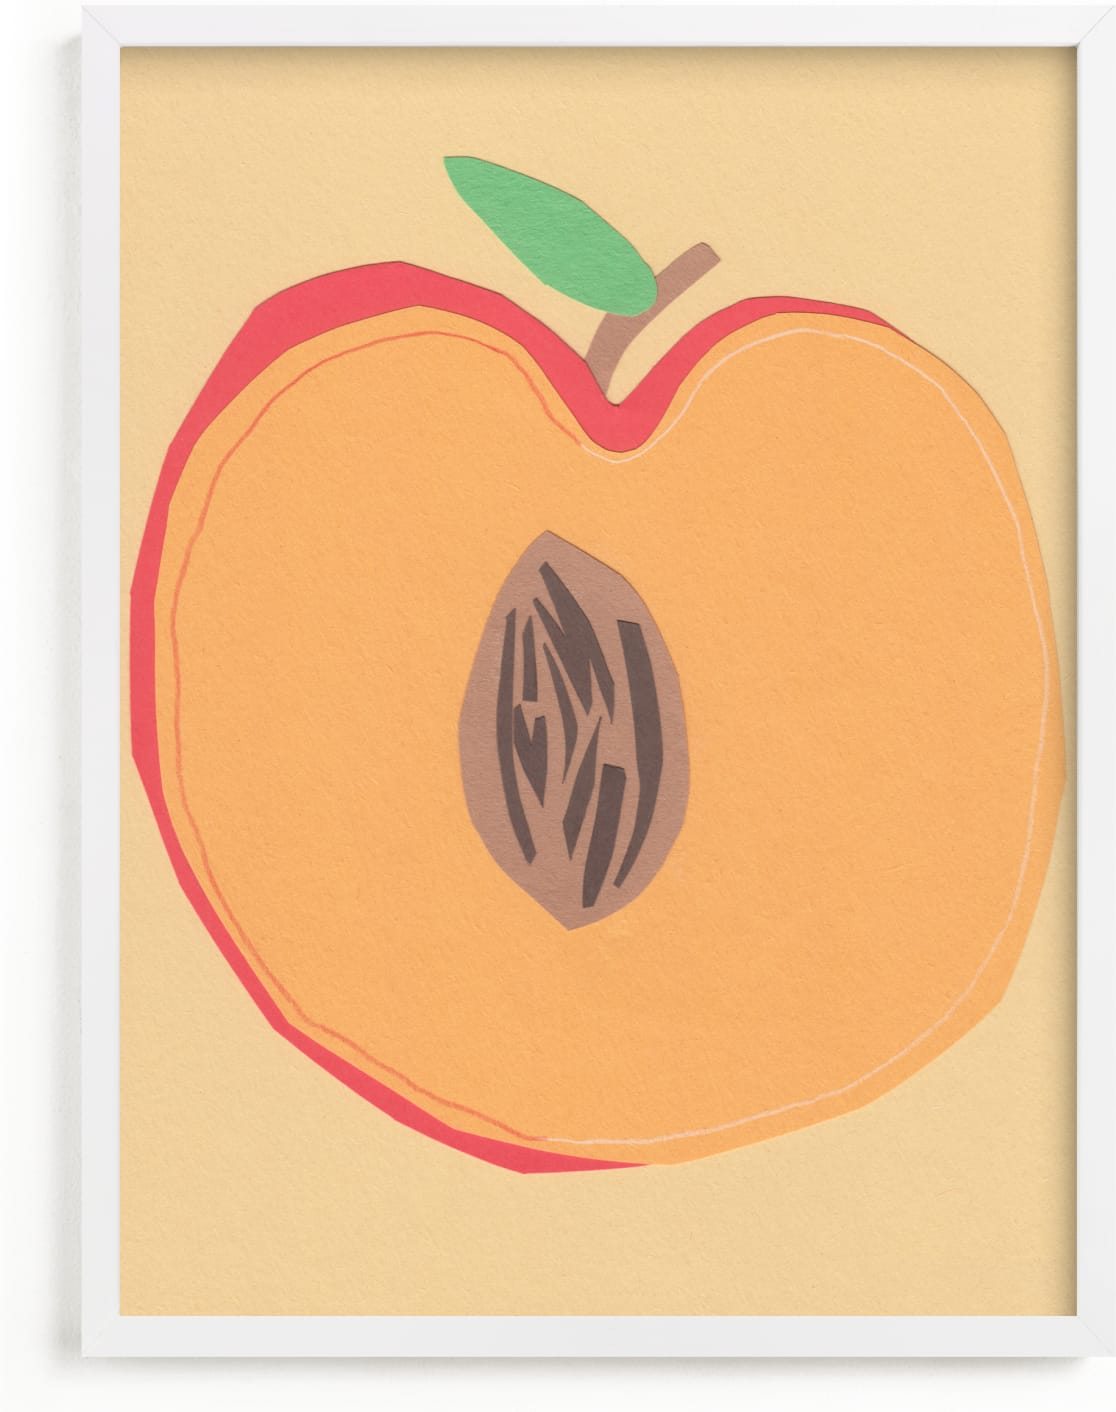 This is a beige, orange, red art by Elliot Stokes called Peach Pit.